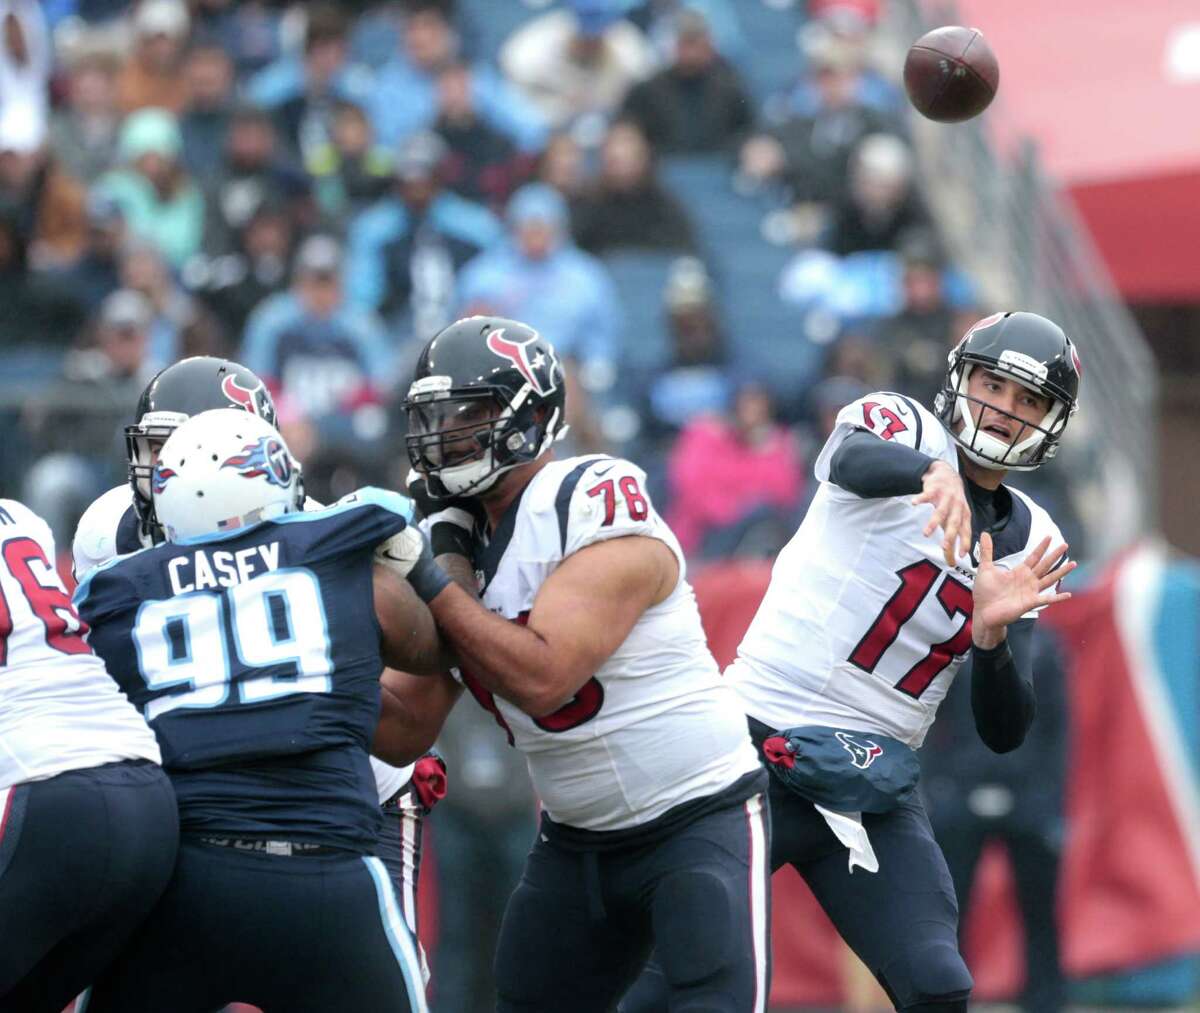 Houston Texans quarterback Brock Osweiler (17) throws a pass against the Tennessee Titans during the second quarter of an NFL football game at Nissan Stadium on Sunday, Jan. 1, 2017, in Nashville. ( Brett Coomer / Houston Chronicle )